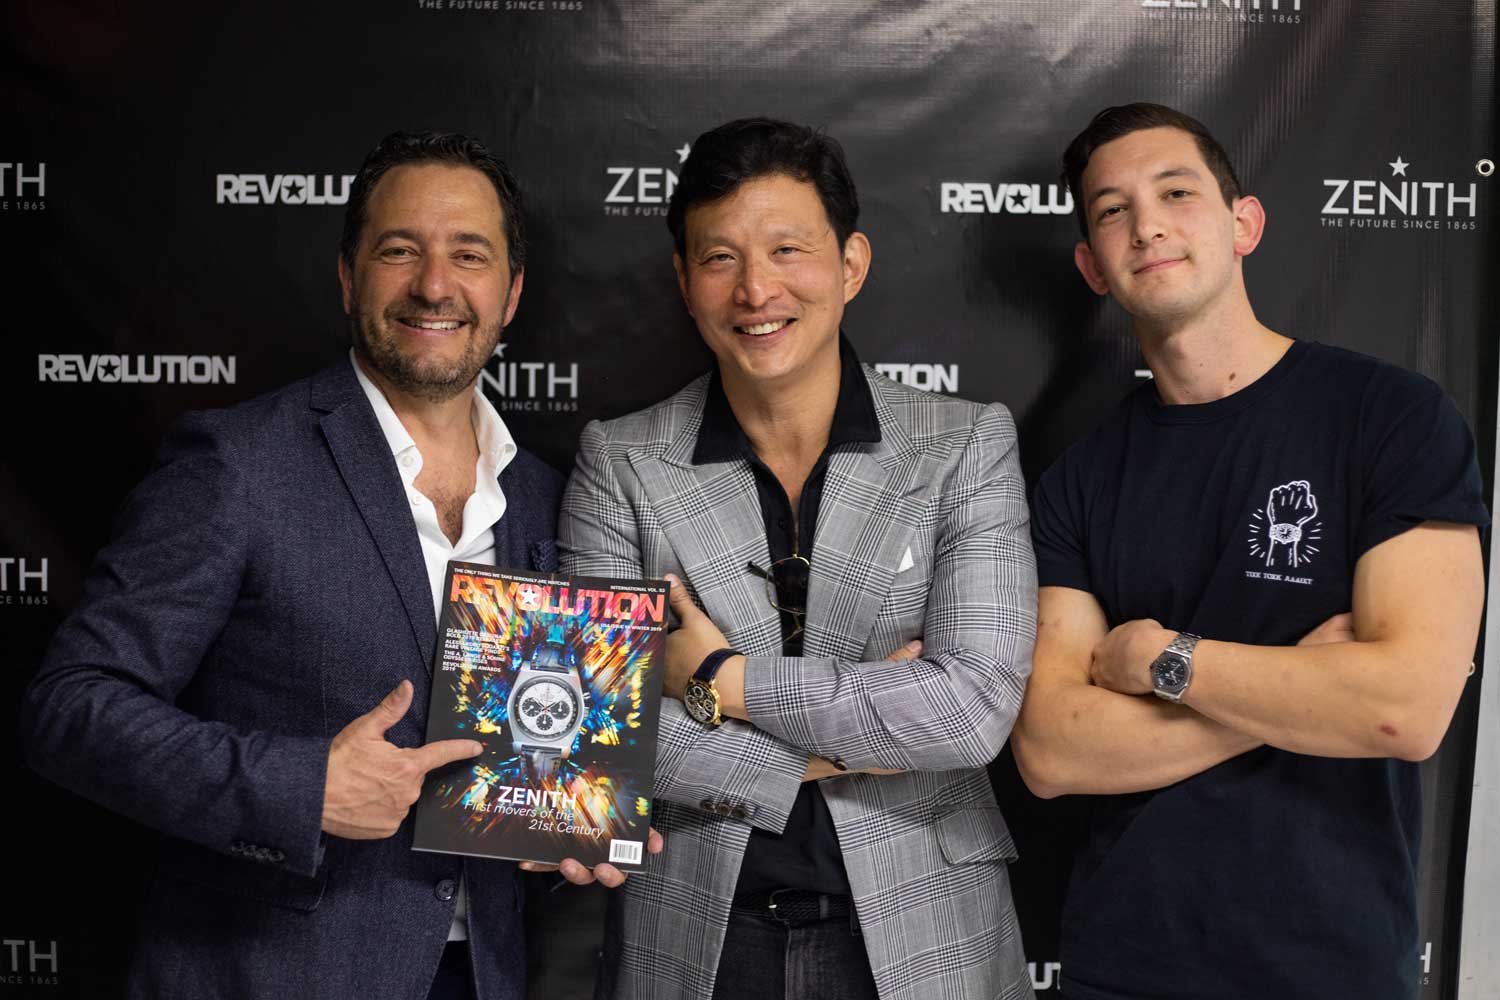 Zenith’s CEO Julien Tornare with Wei at the launch event for the Zenith x Revolution Chronomaster Revival Ref. A3818 “Cover Girl” in Miami.